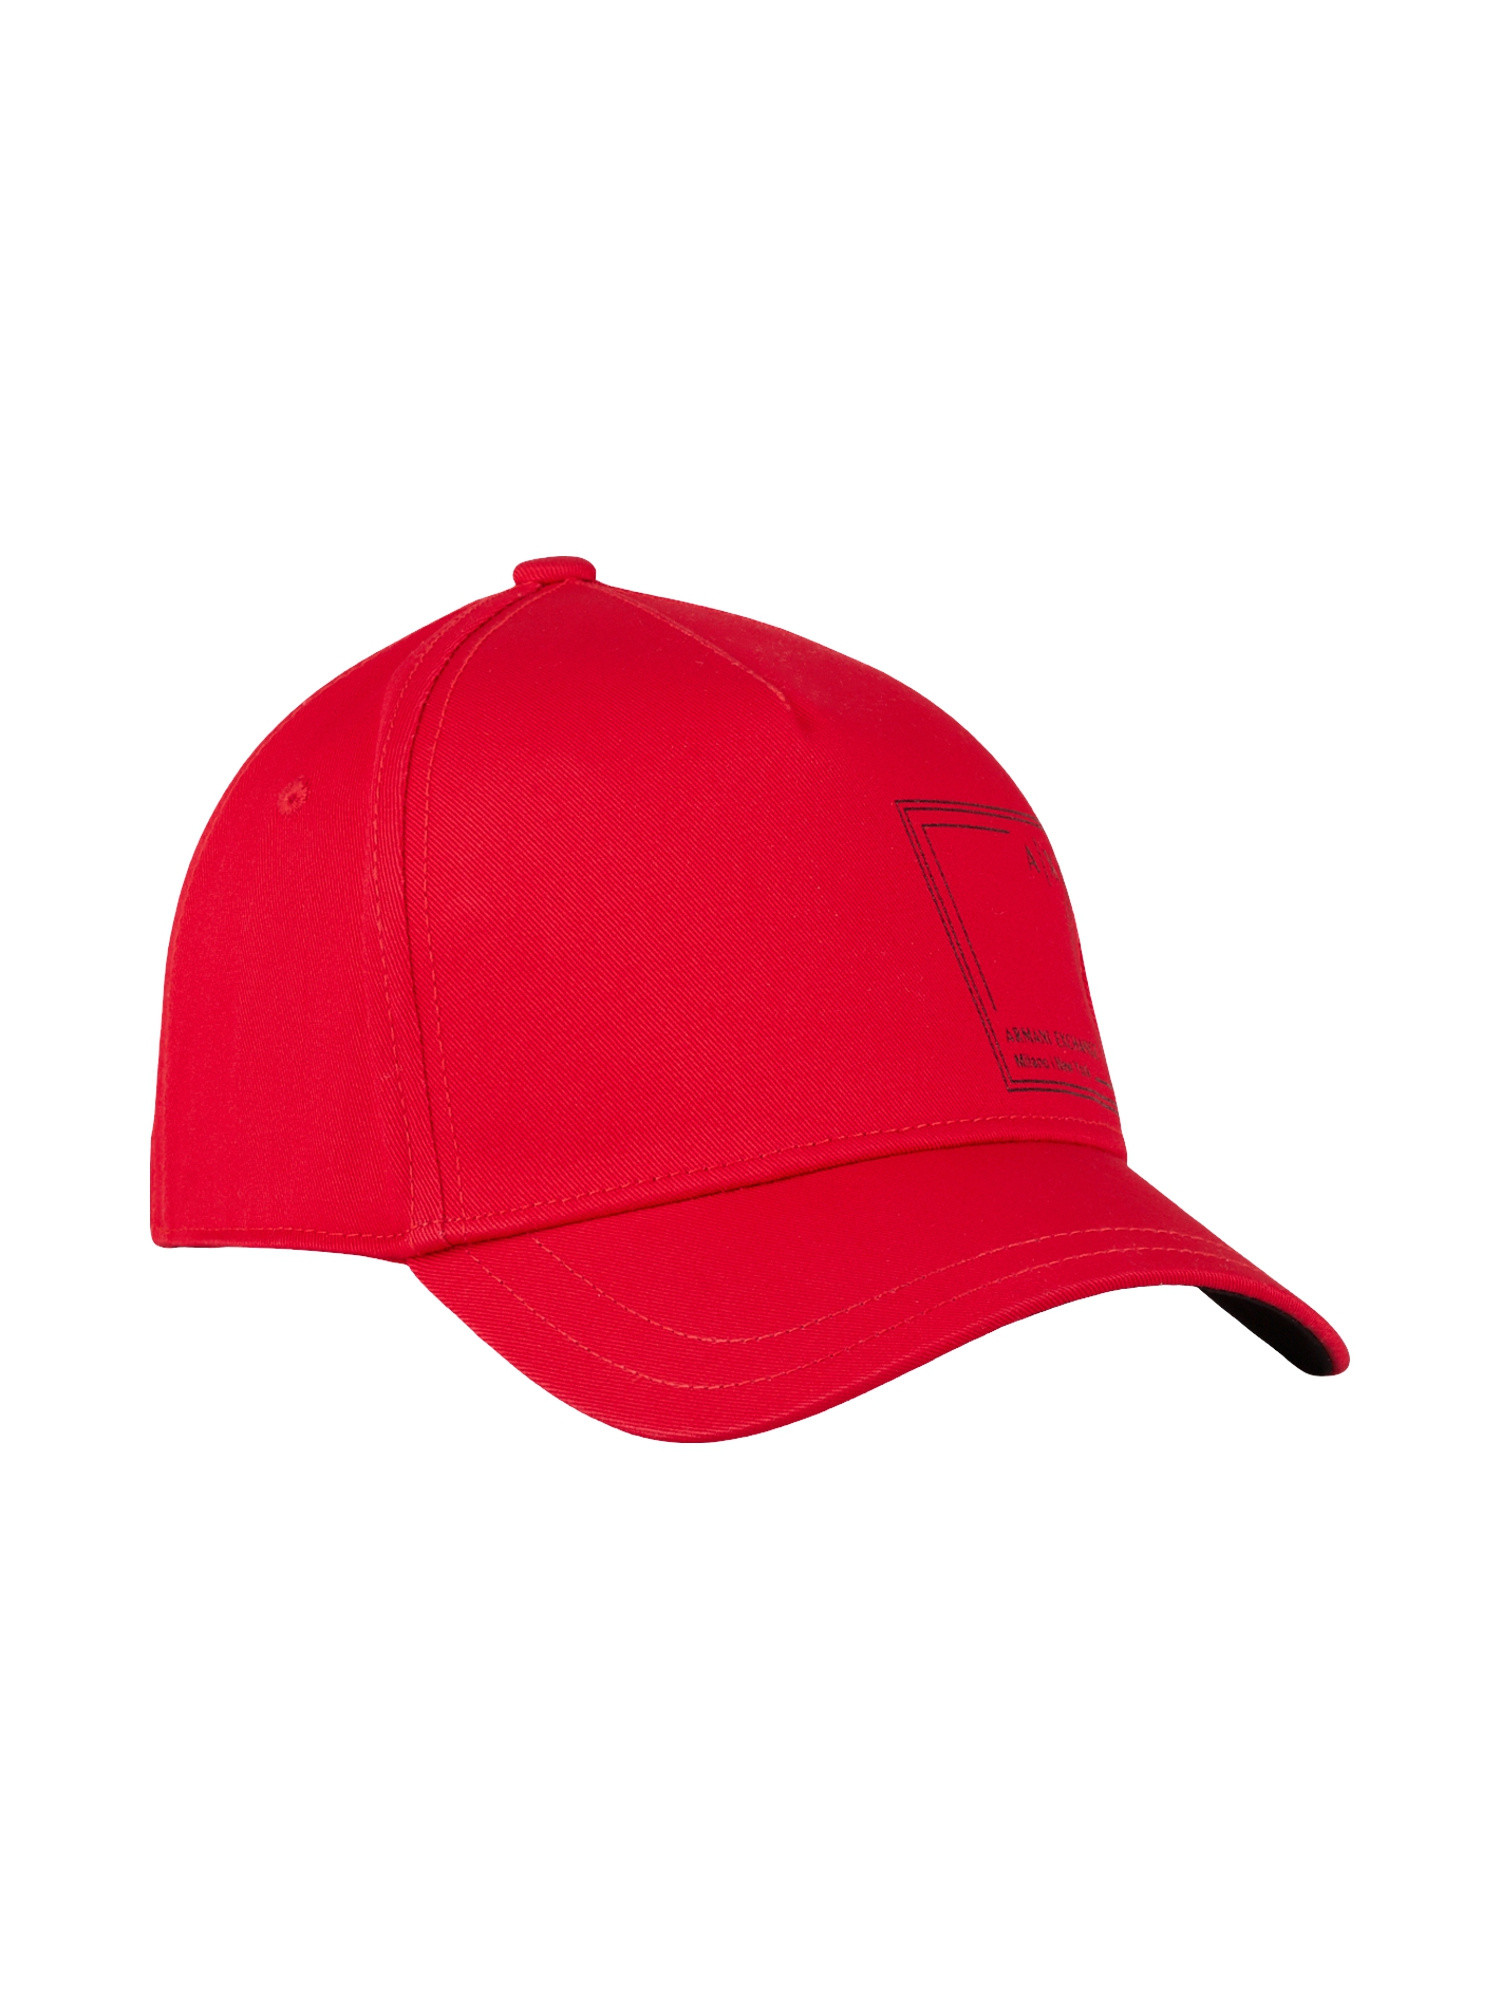 Armani Exchange - Baseball cap in cotton with print, Red, large image number 0